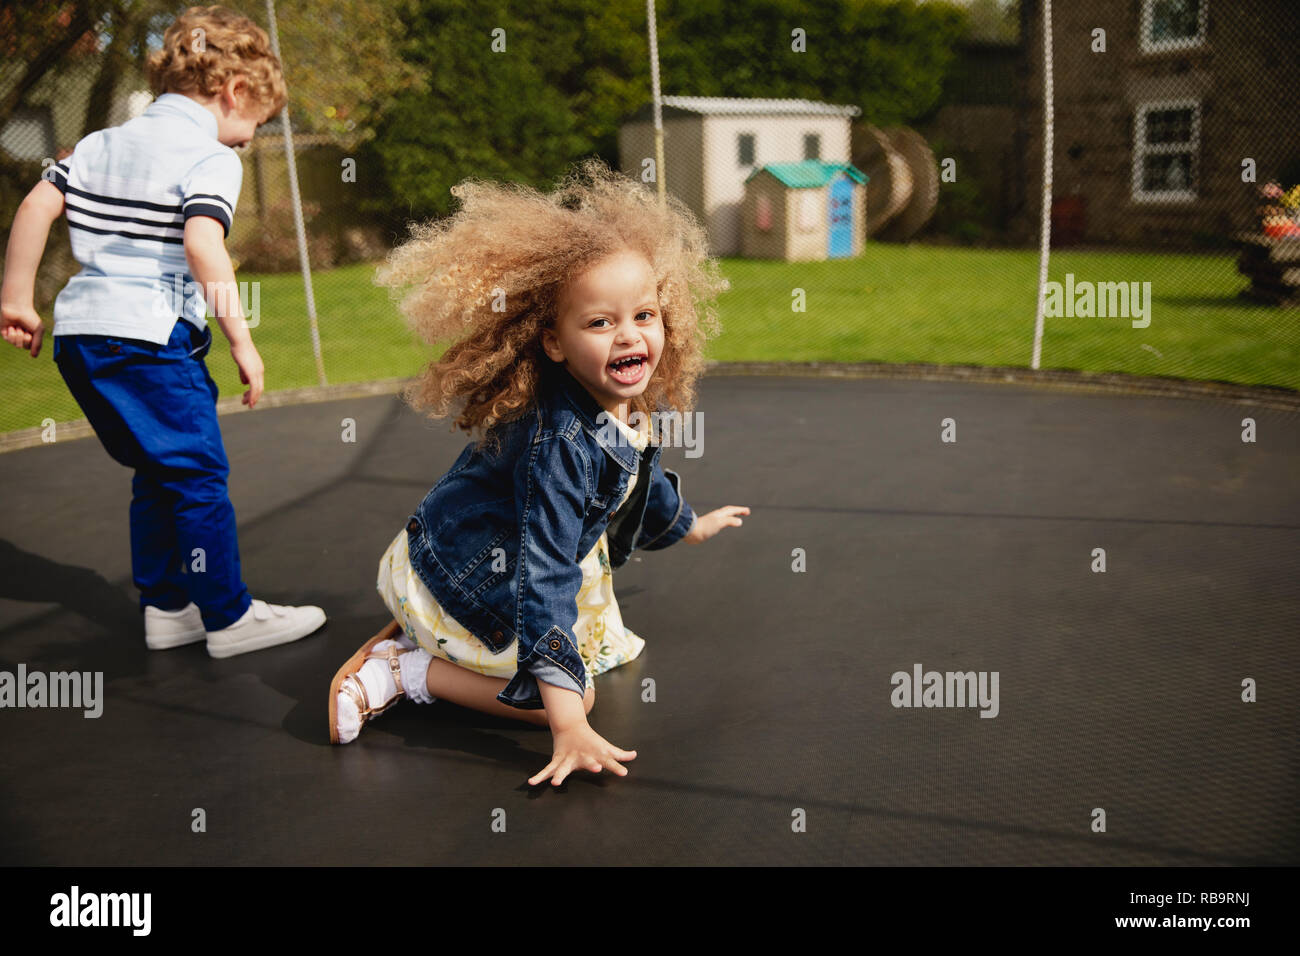 Little girl and boy playing on a tramploine outside. They are having fun and being playful. Stock Photo